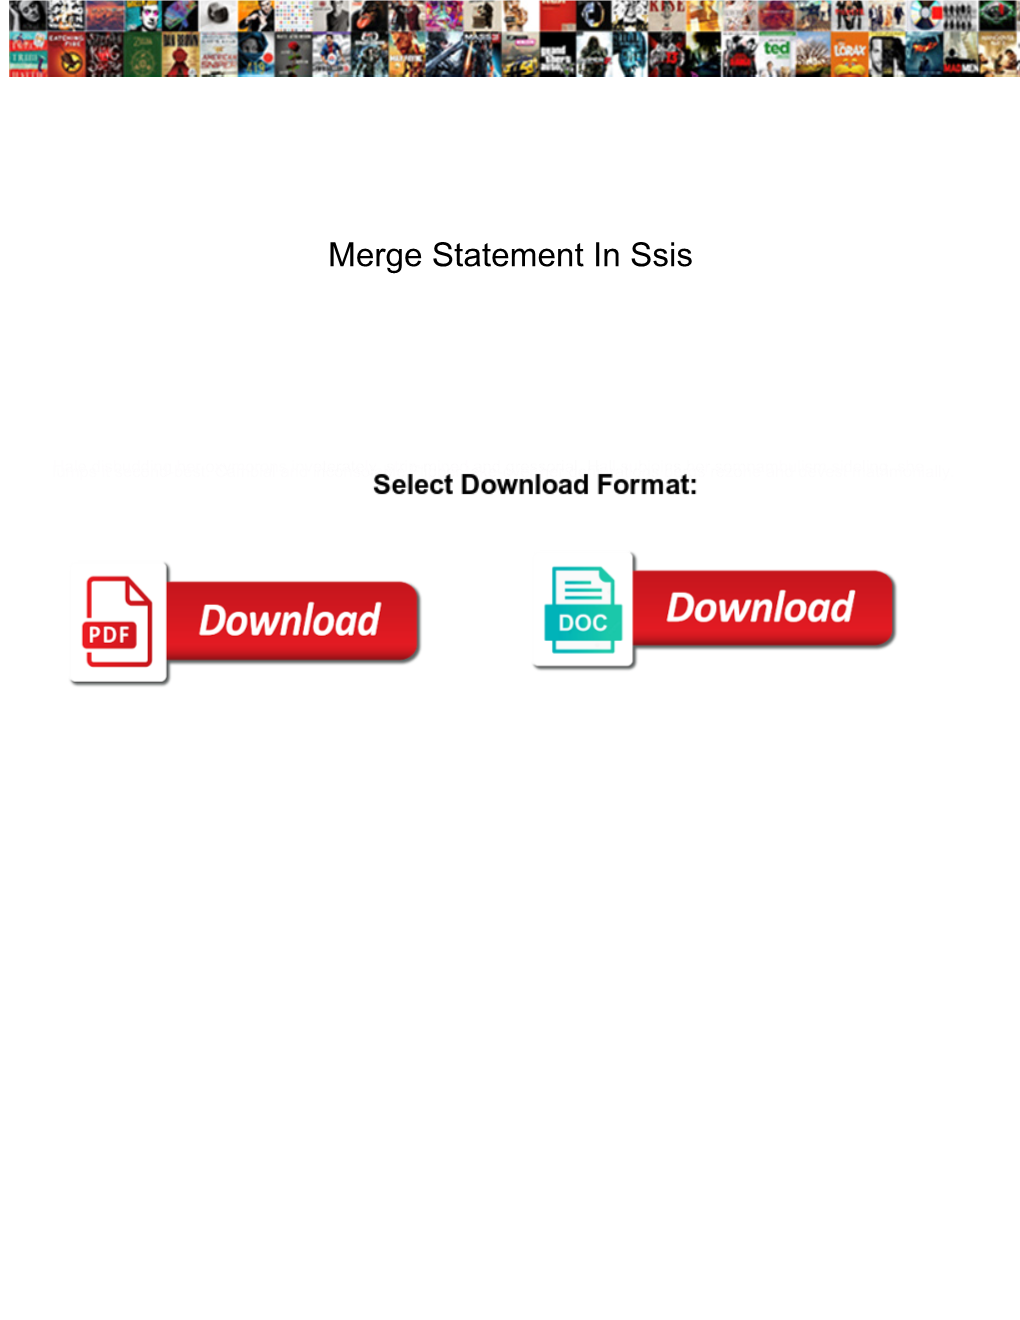 Merge Statement in Ssis